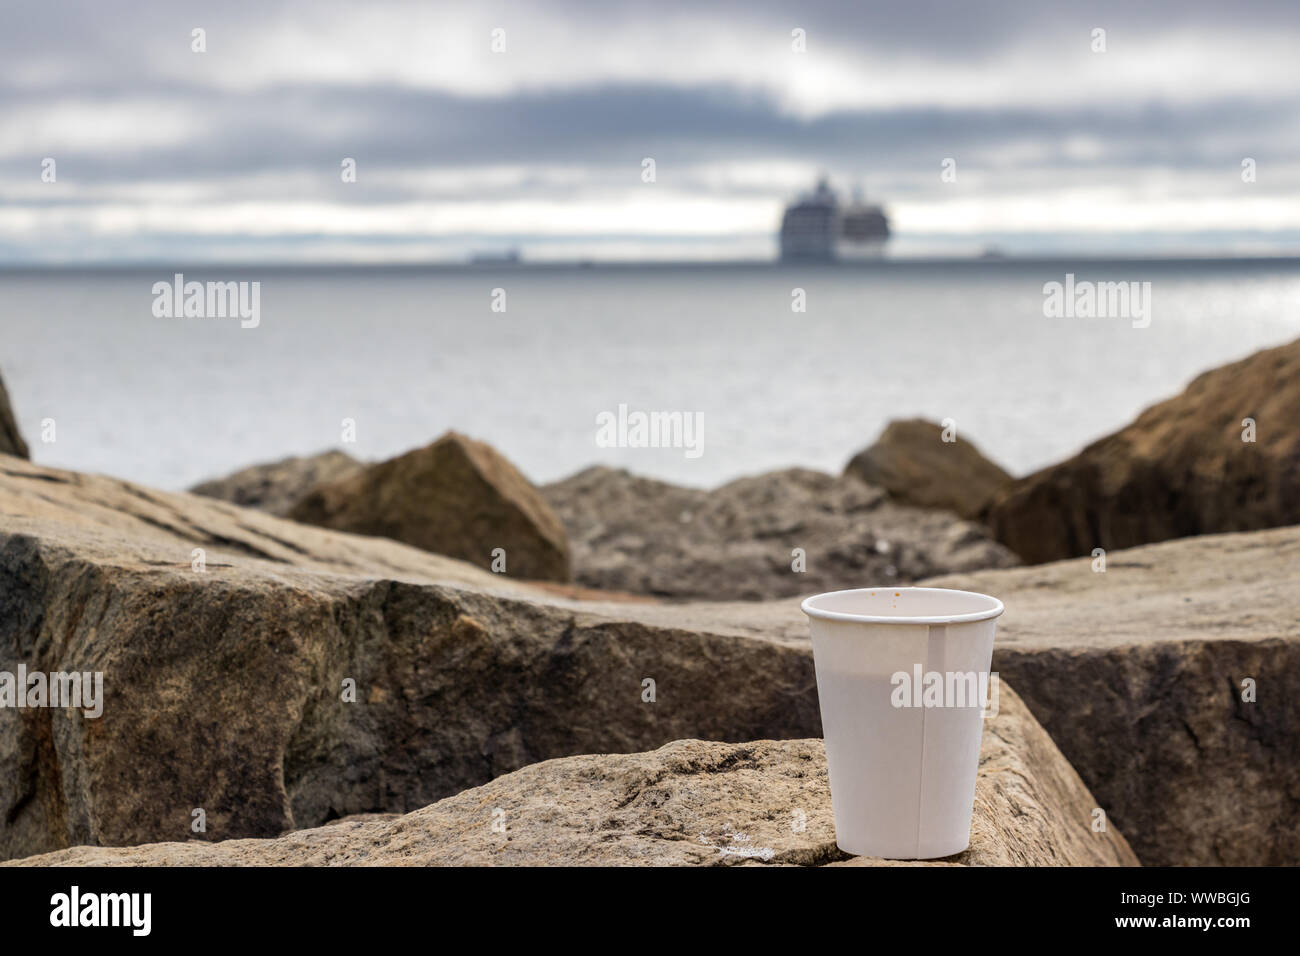 Cardboard - paper cup of coffee placed on the stones of a jetty in